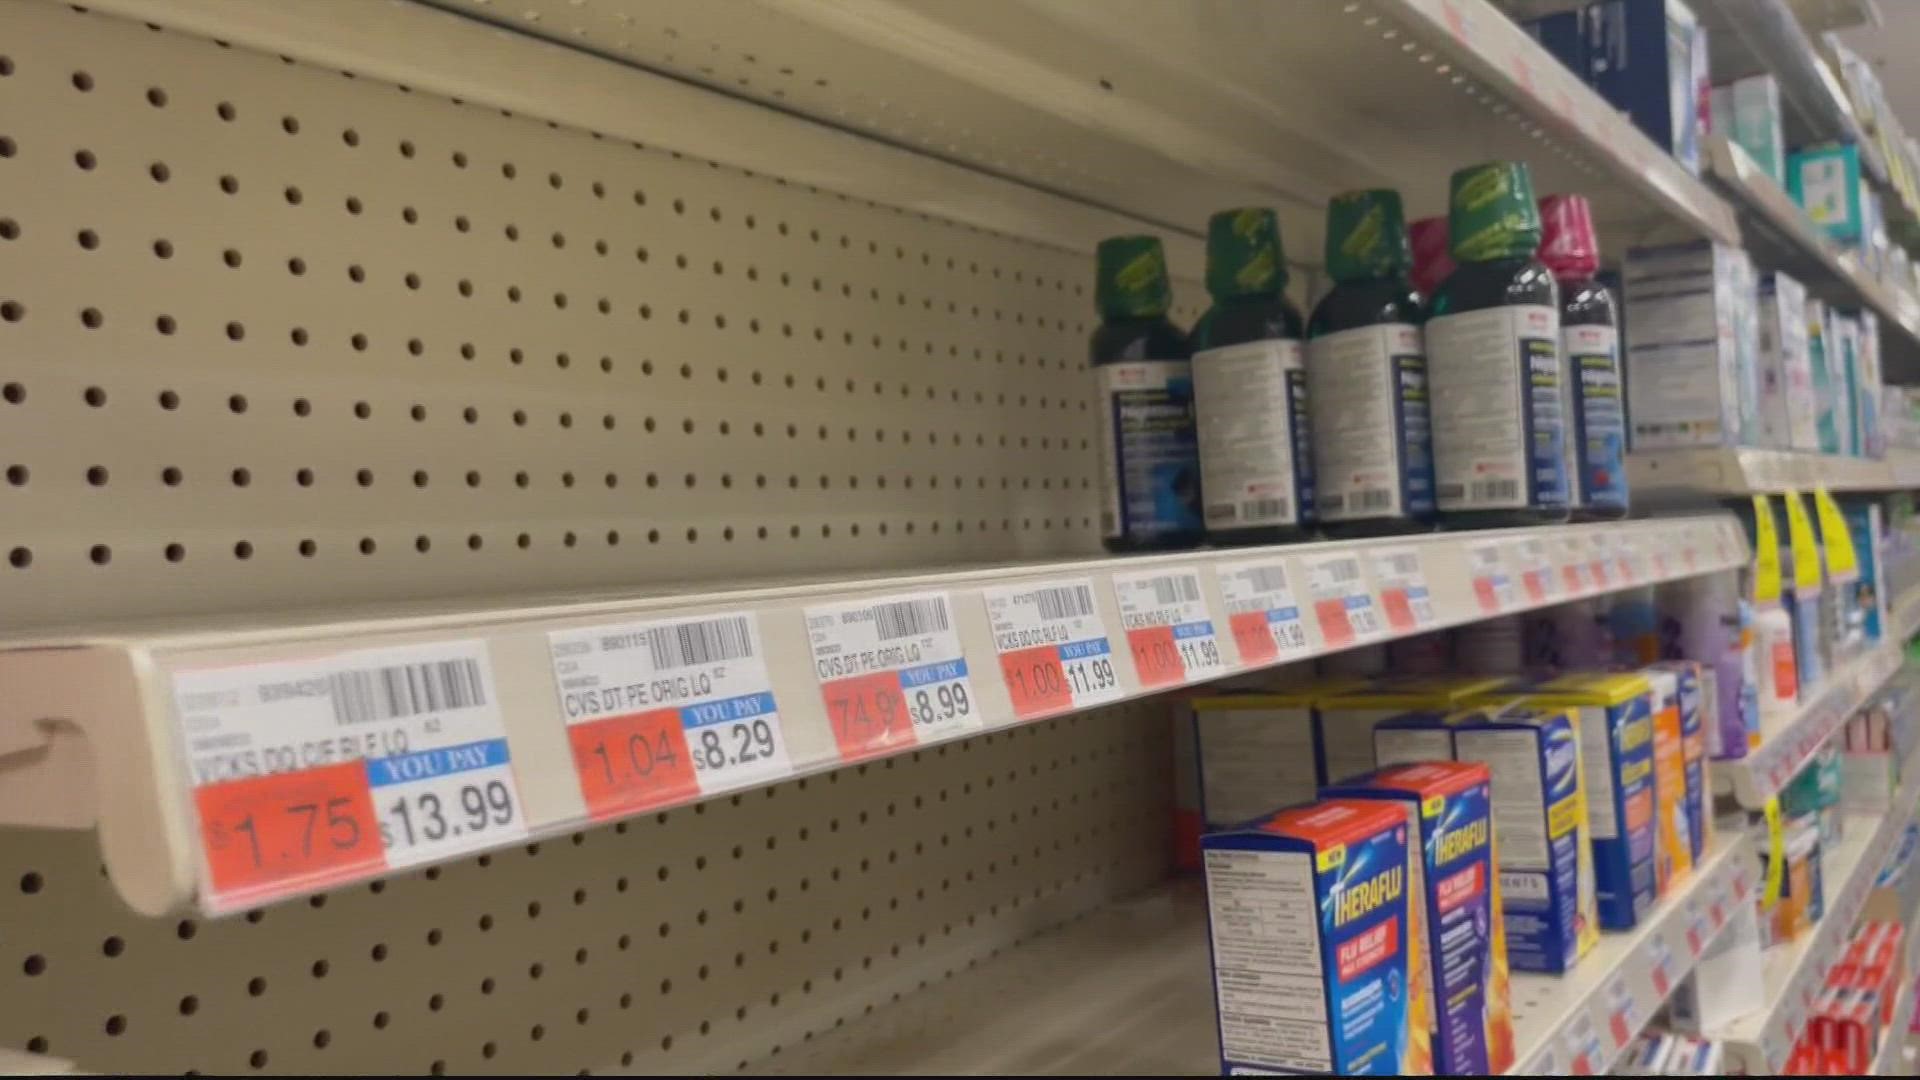 Parents are seeing empty shelves when looking for medicine for their children.